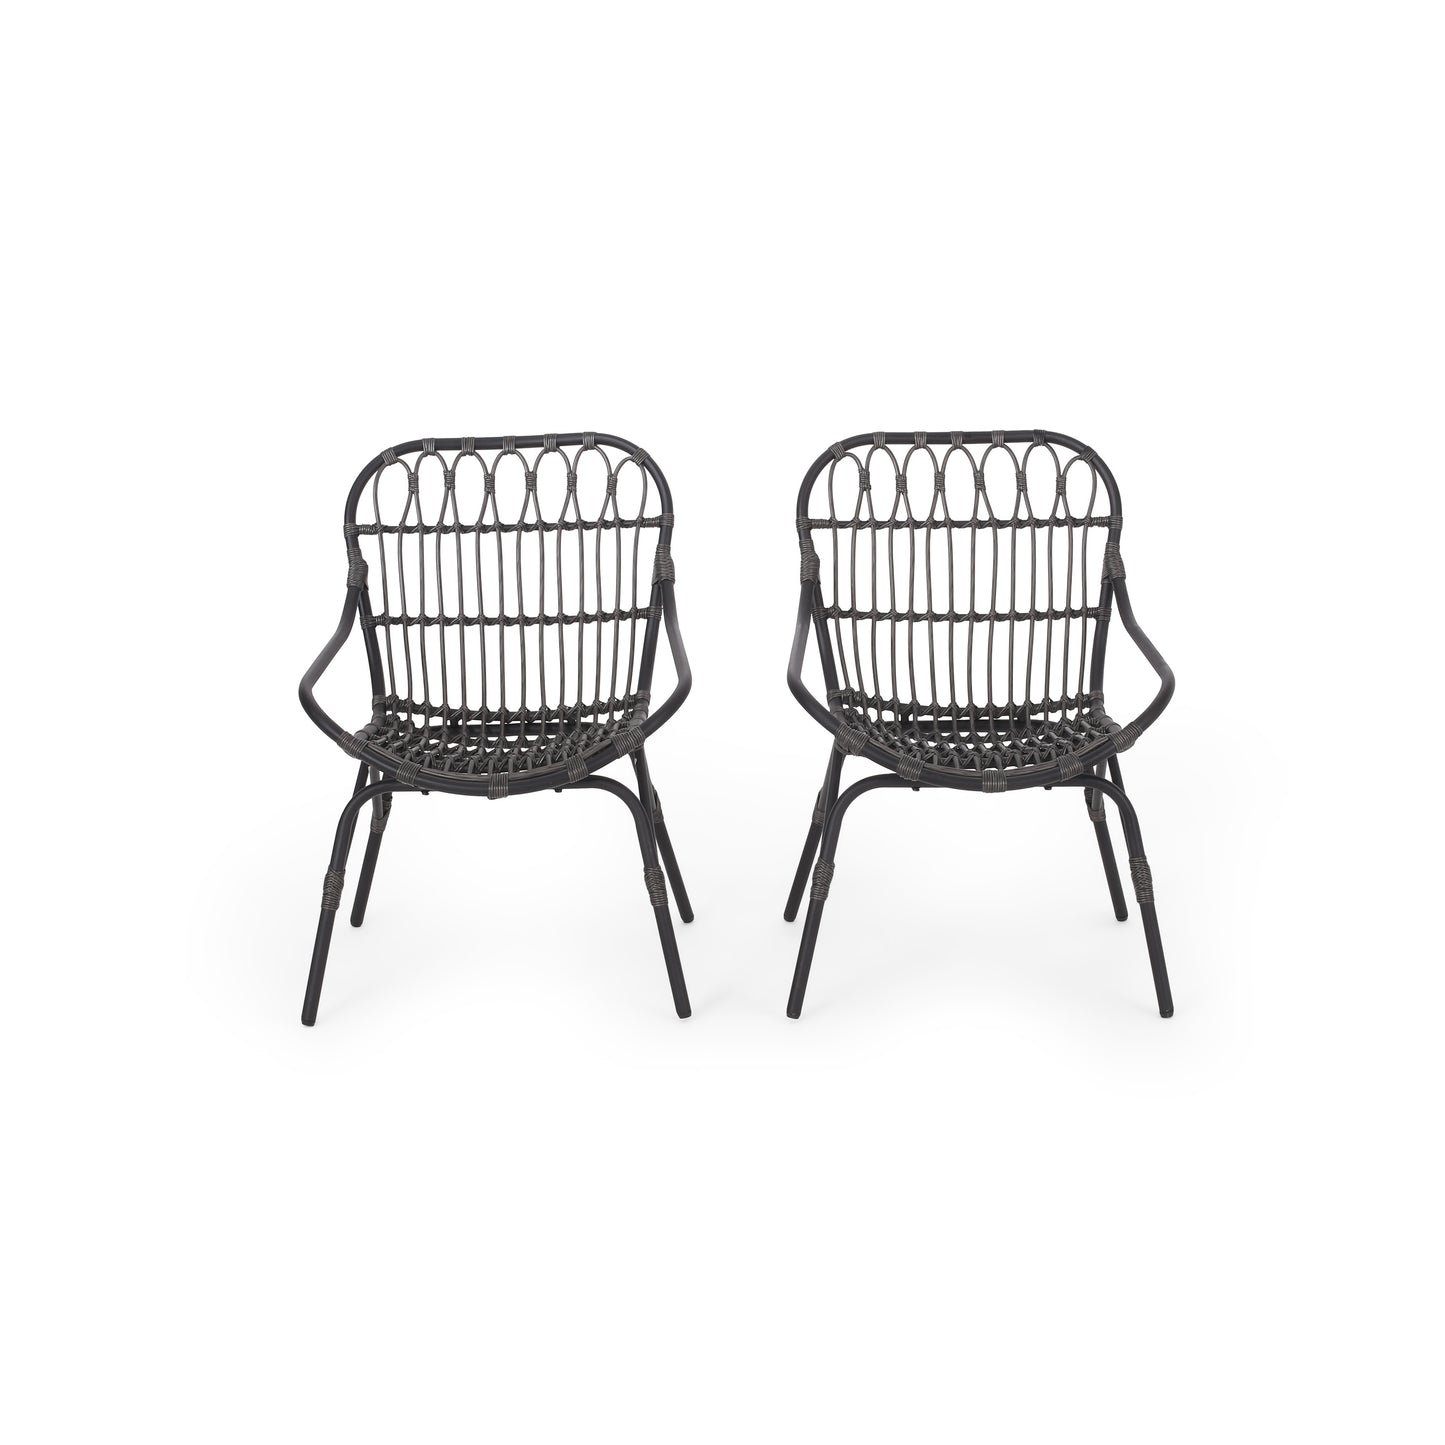 Barrister Outdoor Wicker Accent Chairs, Set of 2